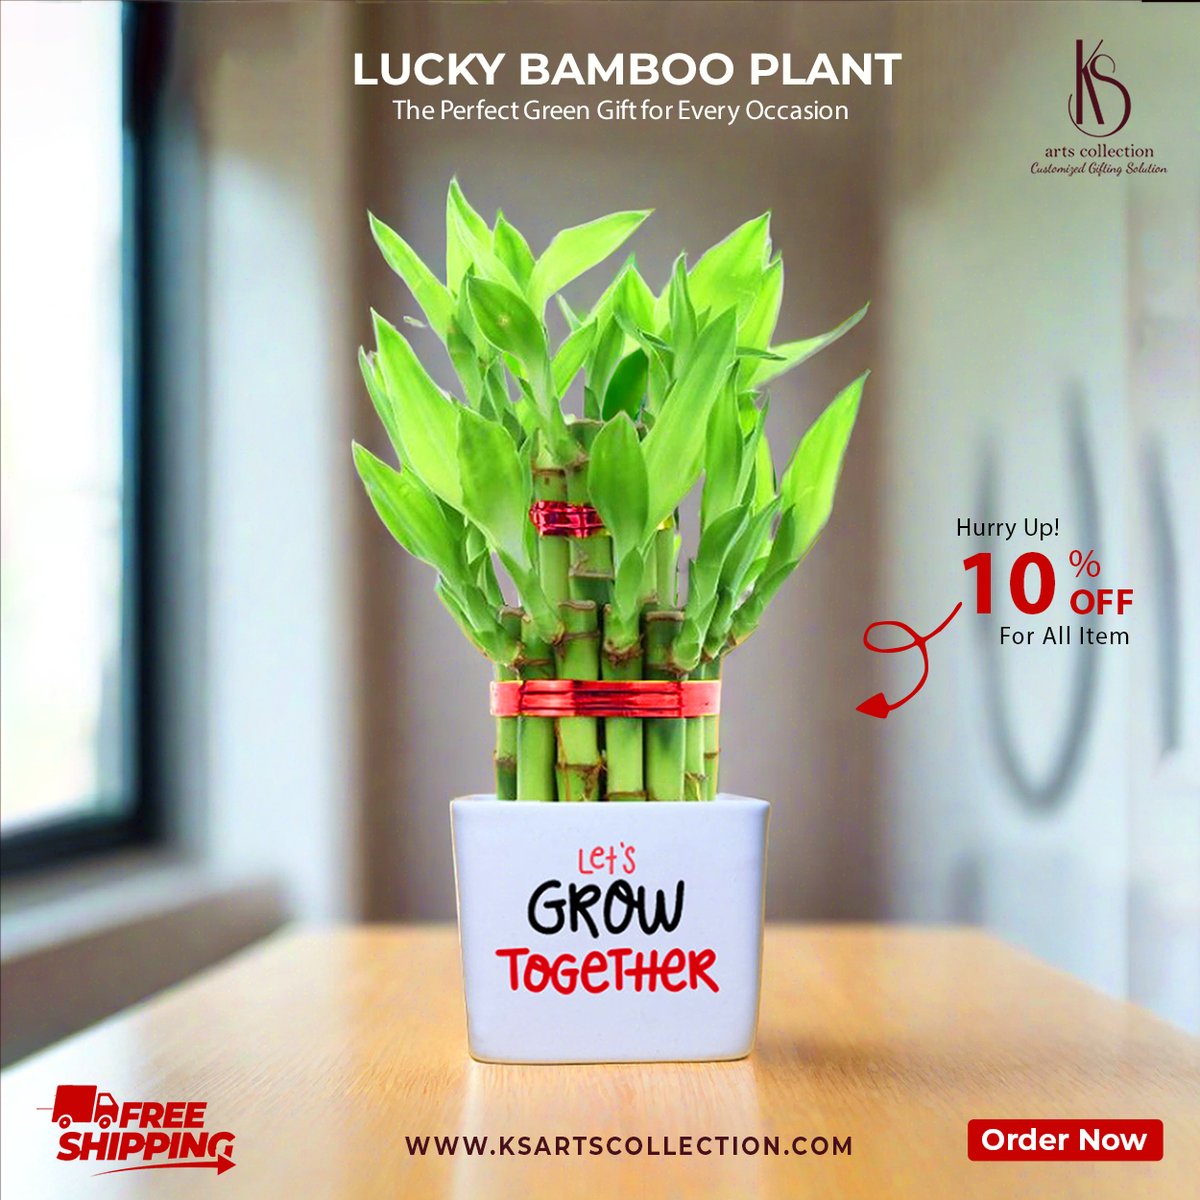 LUCKY BAMBOO PLANT  ksartscollection.com/products/ks-ba…
#liveplants #plantgifts #plantgifting #plantgiftsarethebestgifts #liveplants #homegarden #homegardener #homegardening #homegardenlove #garden #gardening #gardenlove #gardeninspiration #gardenideas #gardeningtips #gifts #giftideas